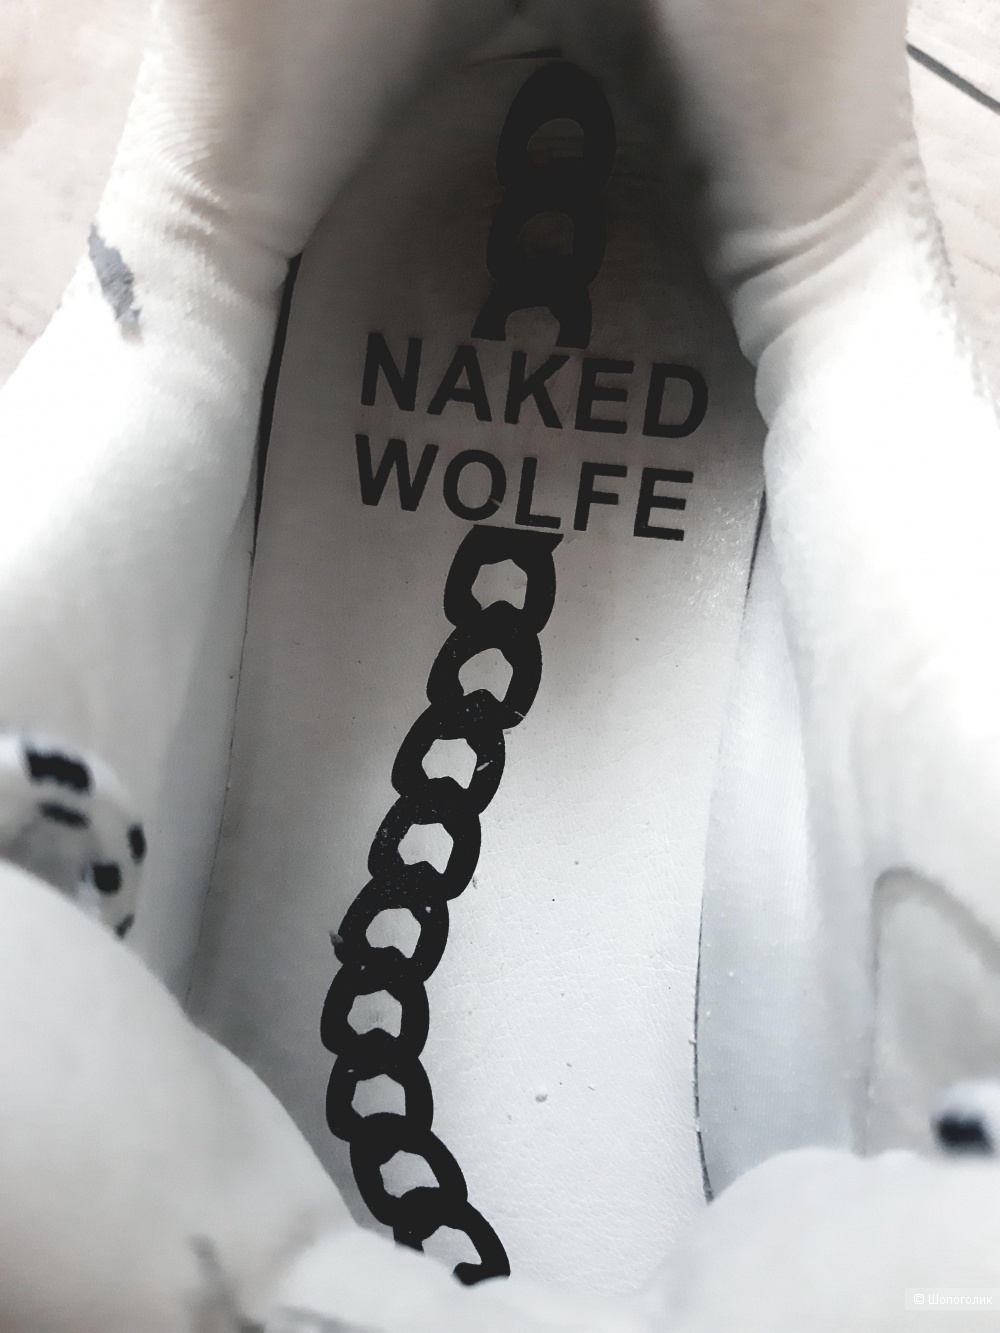 Кроссовки NAKED WOLFE, размер 40